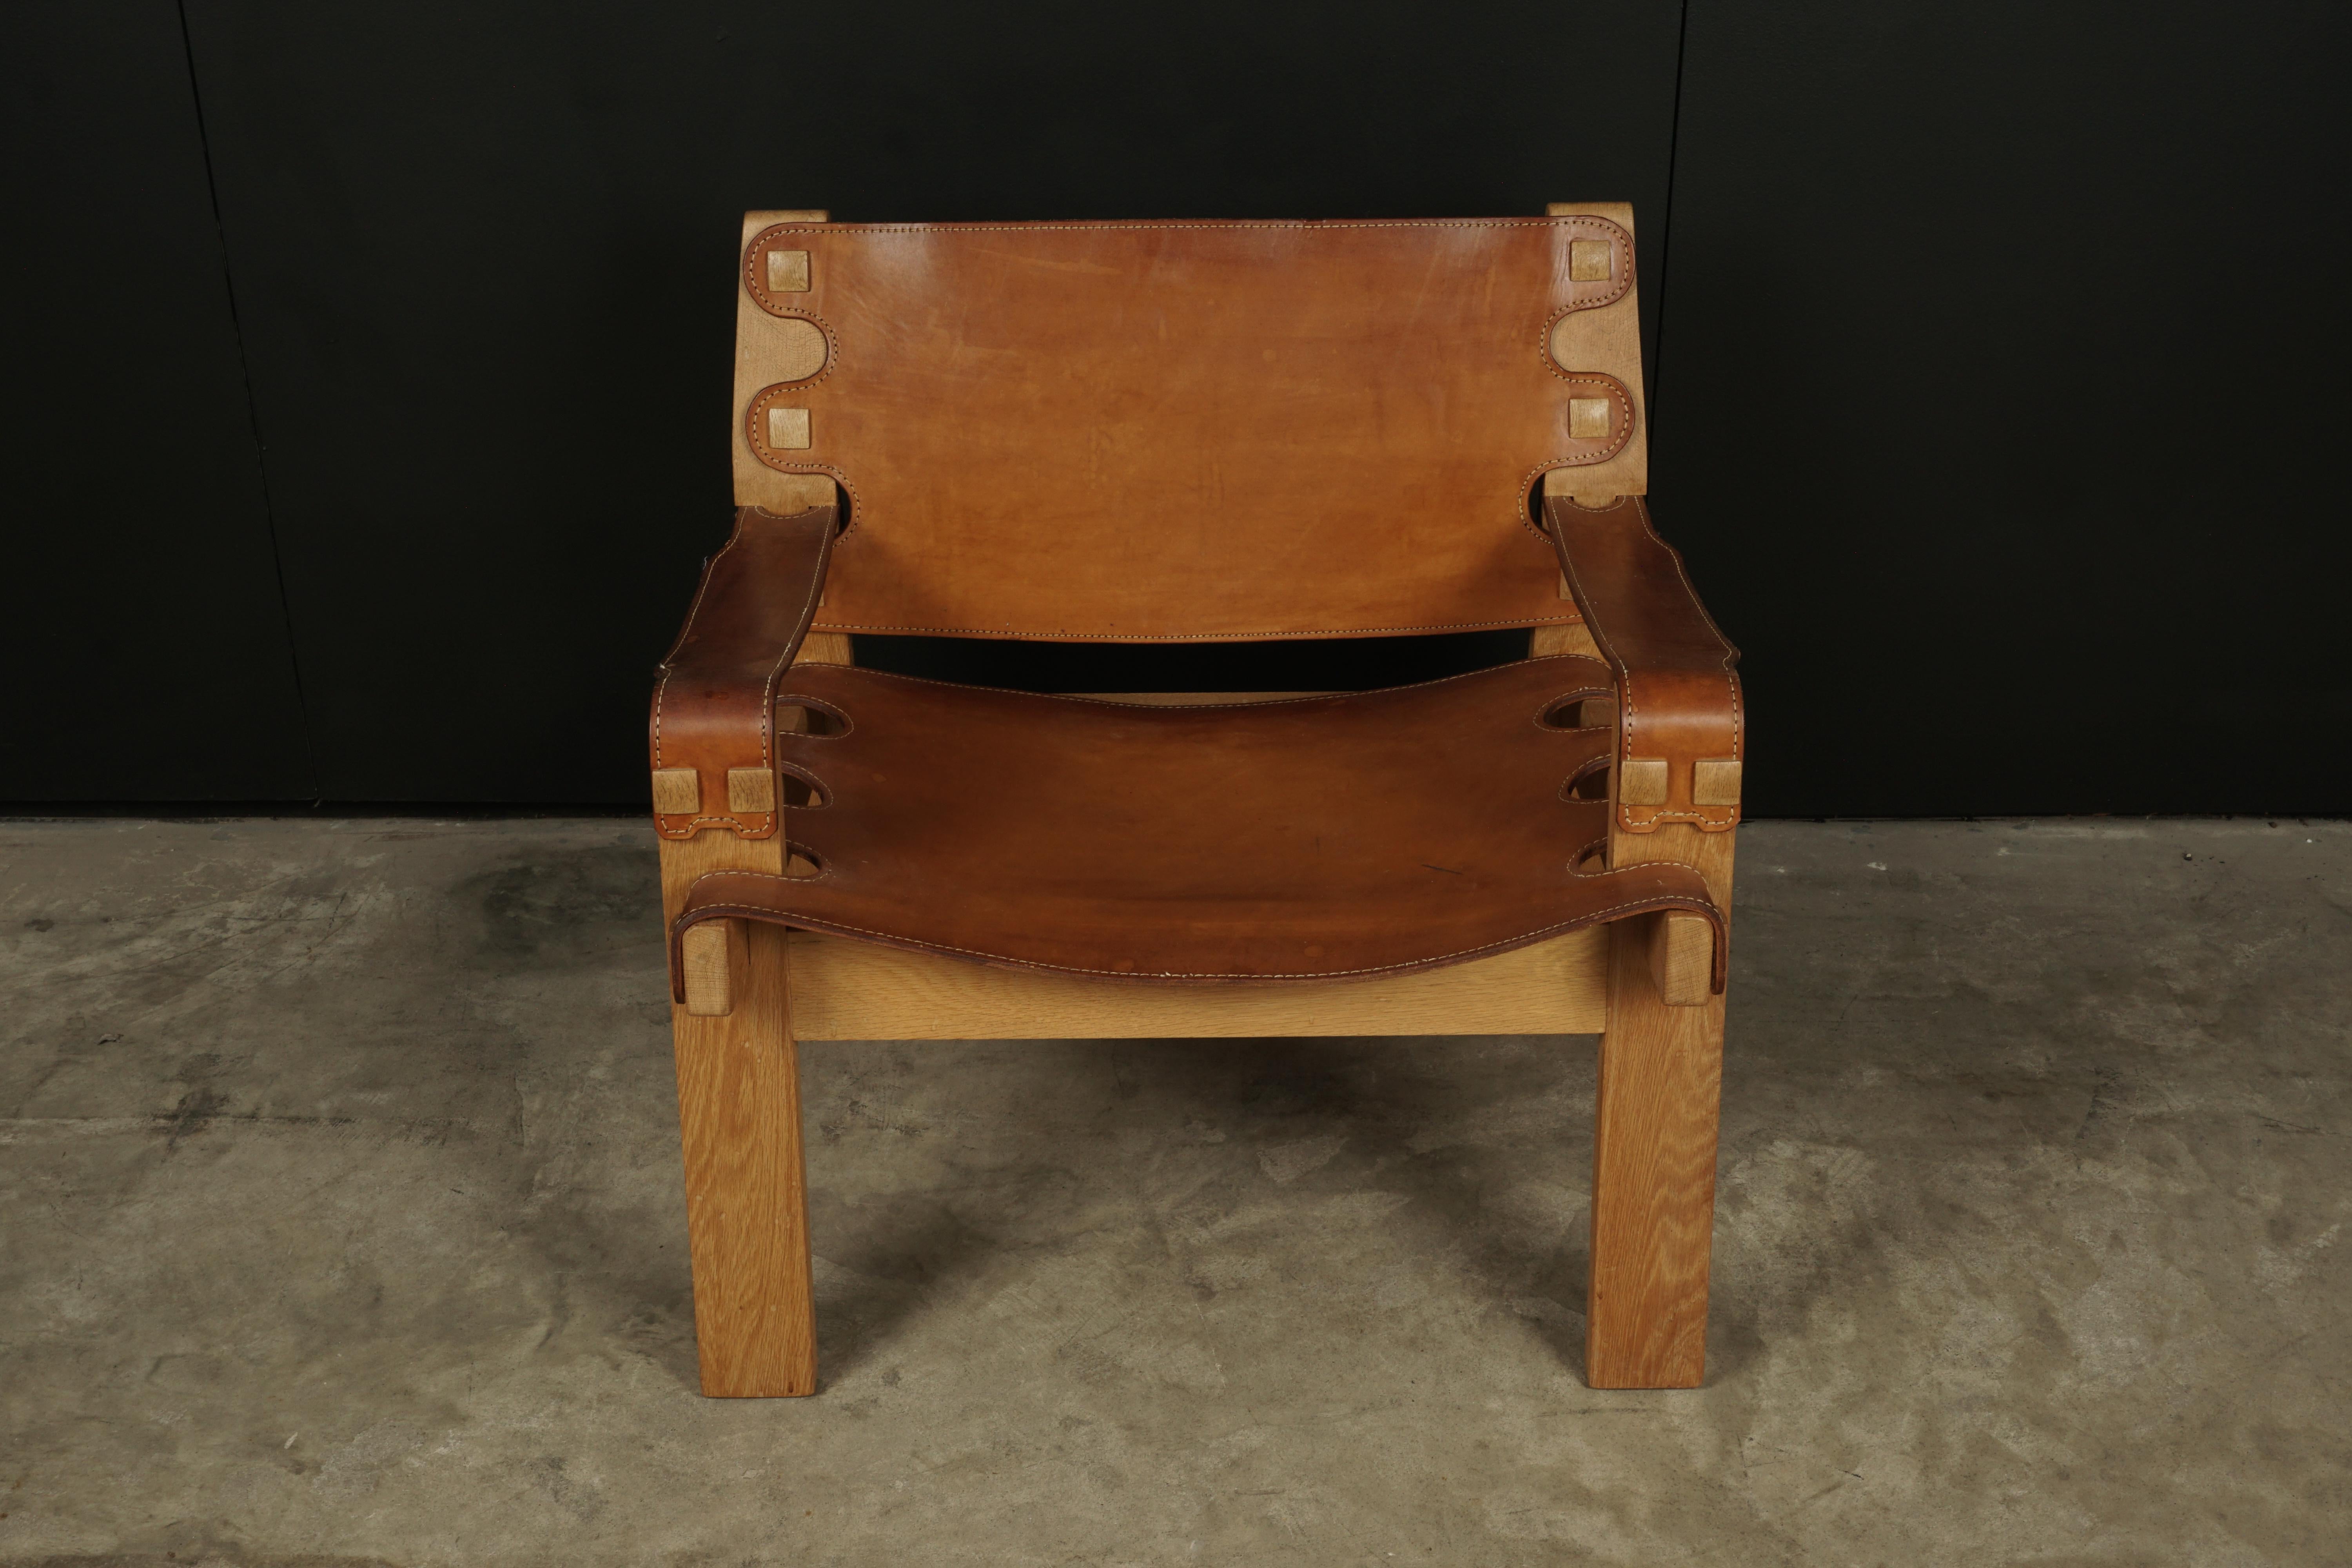 Rare leather lounge chair from Denmark, circa 1970. Solid oak construction with thick harness leather. Nice original color and wear.